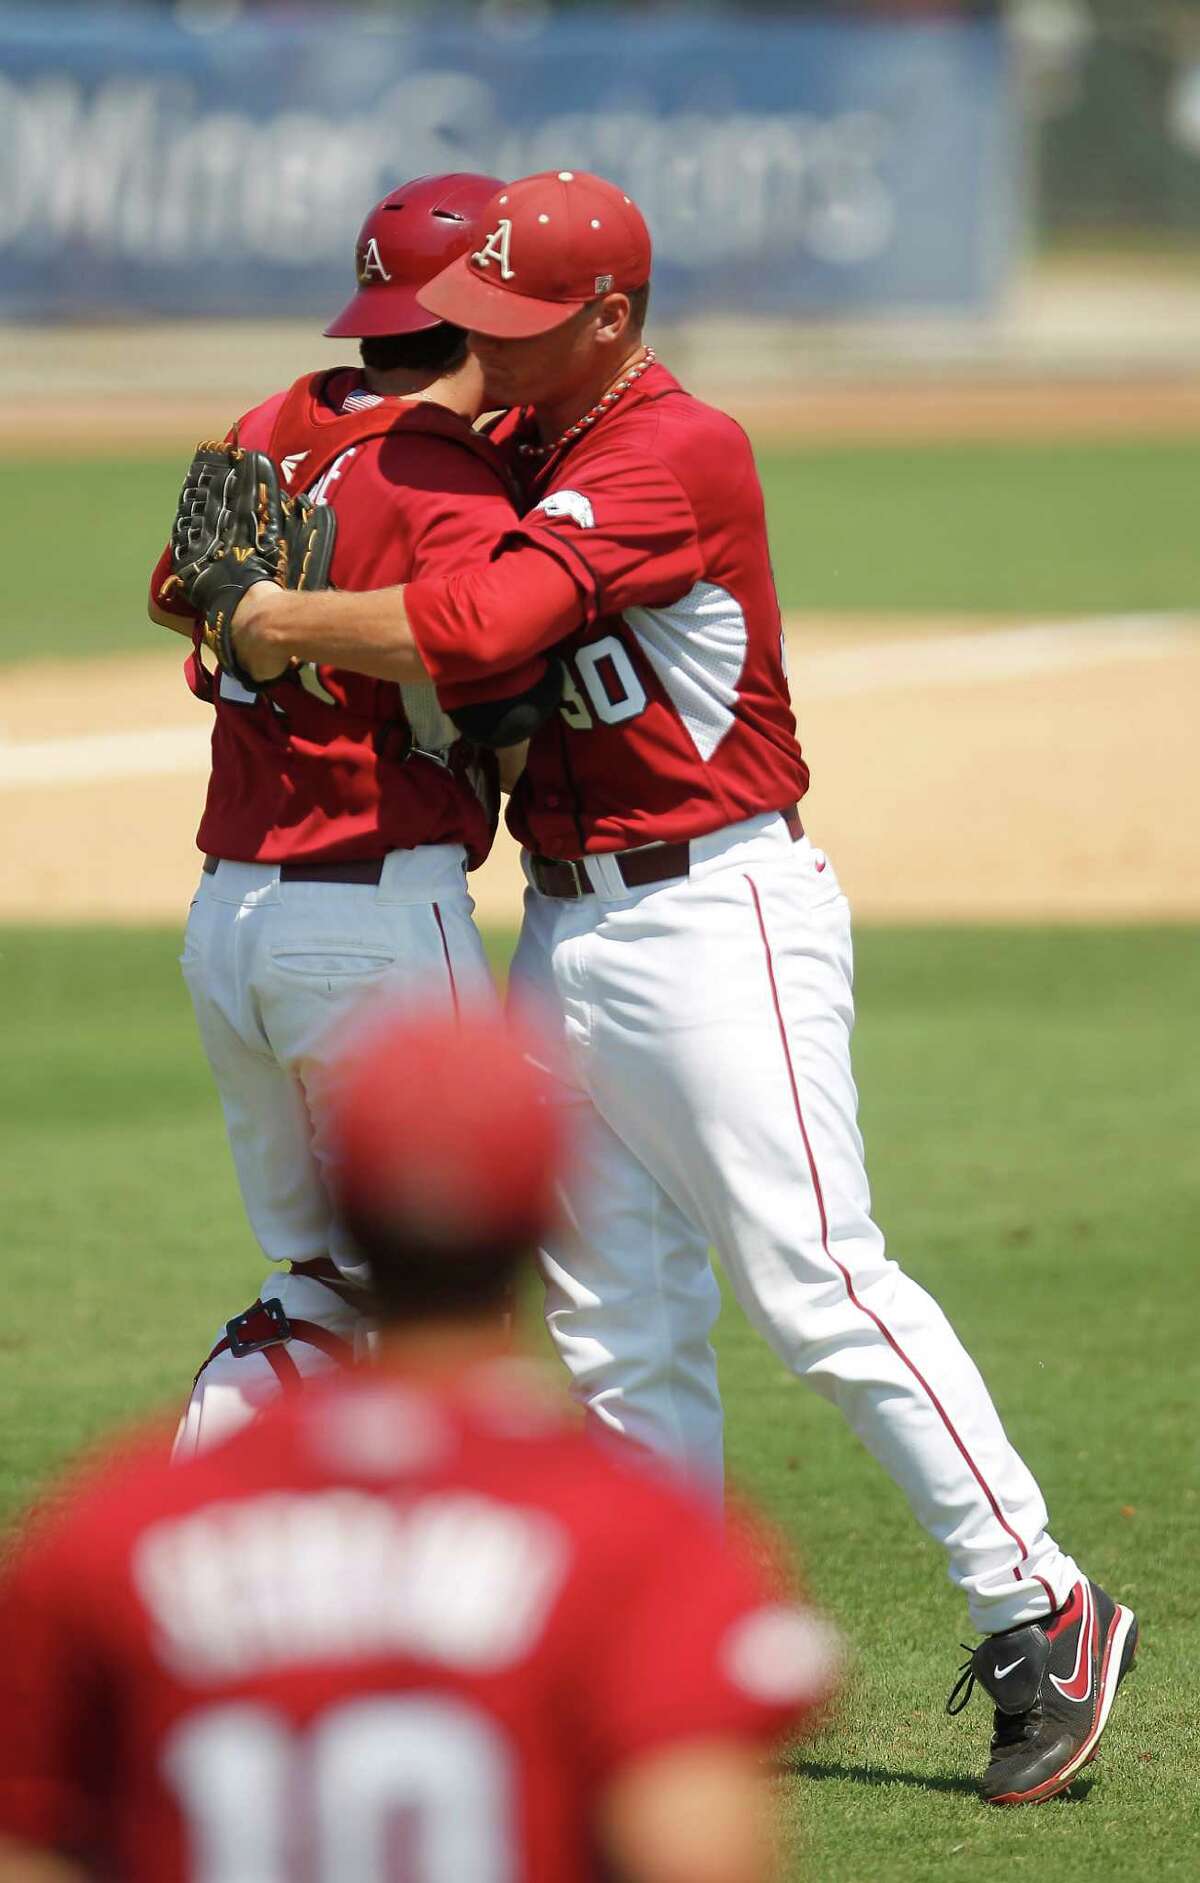 Arkansas' pitcher Brandon Moore (30) and his catcher Jake Wise (19) celebrate their win over Sam Houston 5-4 during a college baseball game at the Houston Regional at Rice University, Friday, June 1, 2012, in Houston.